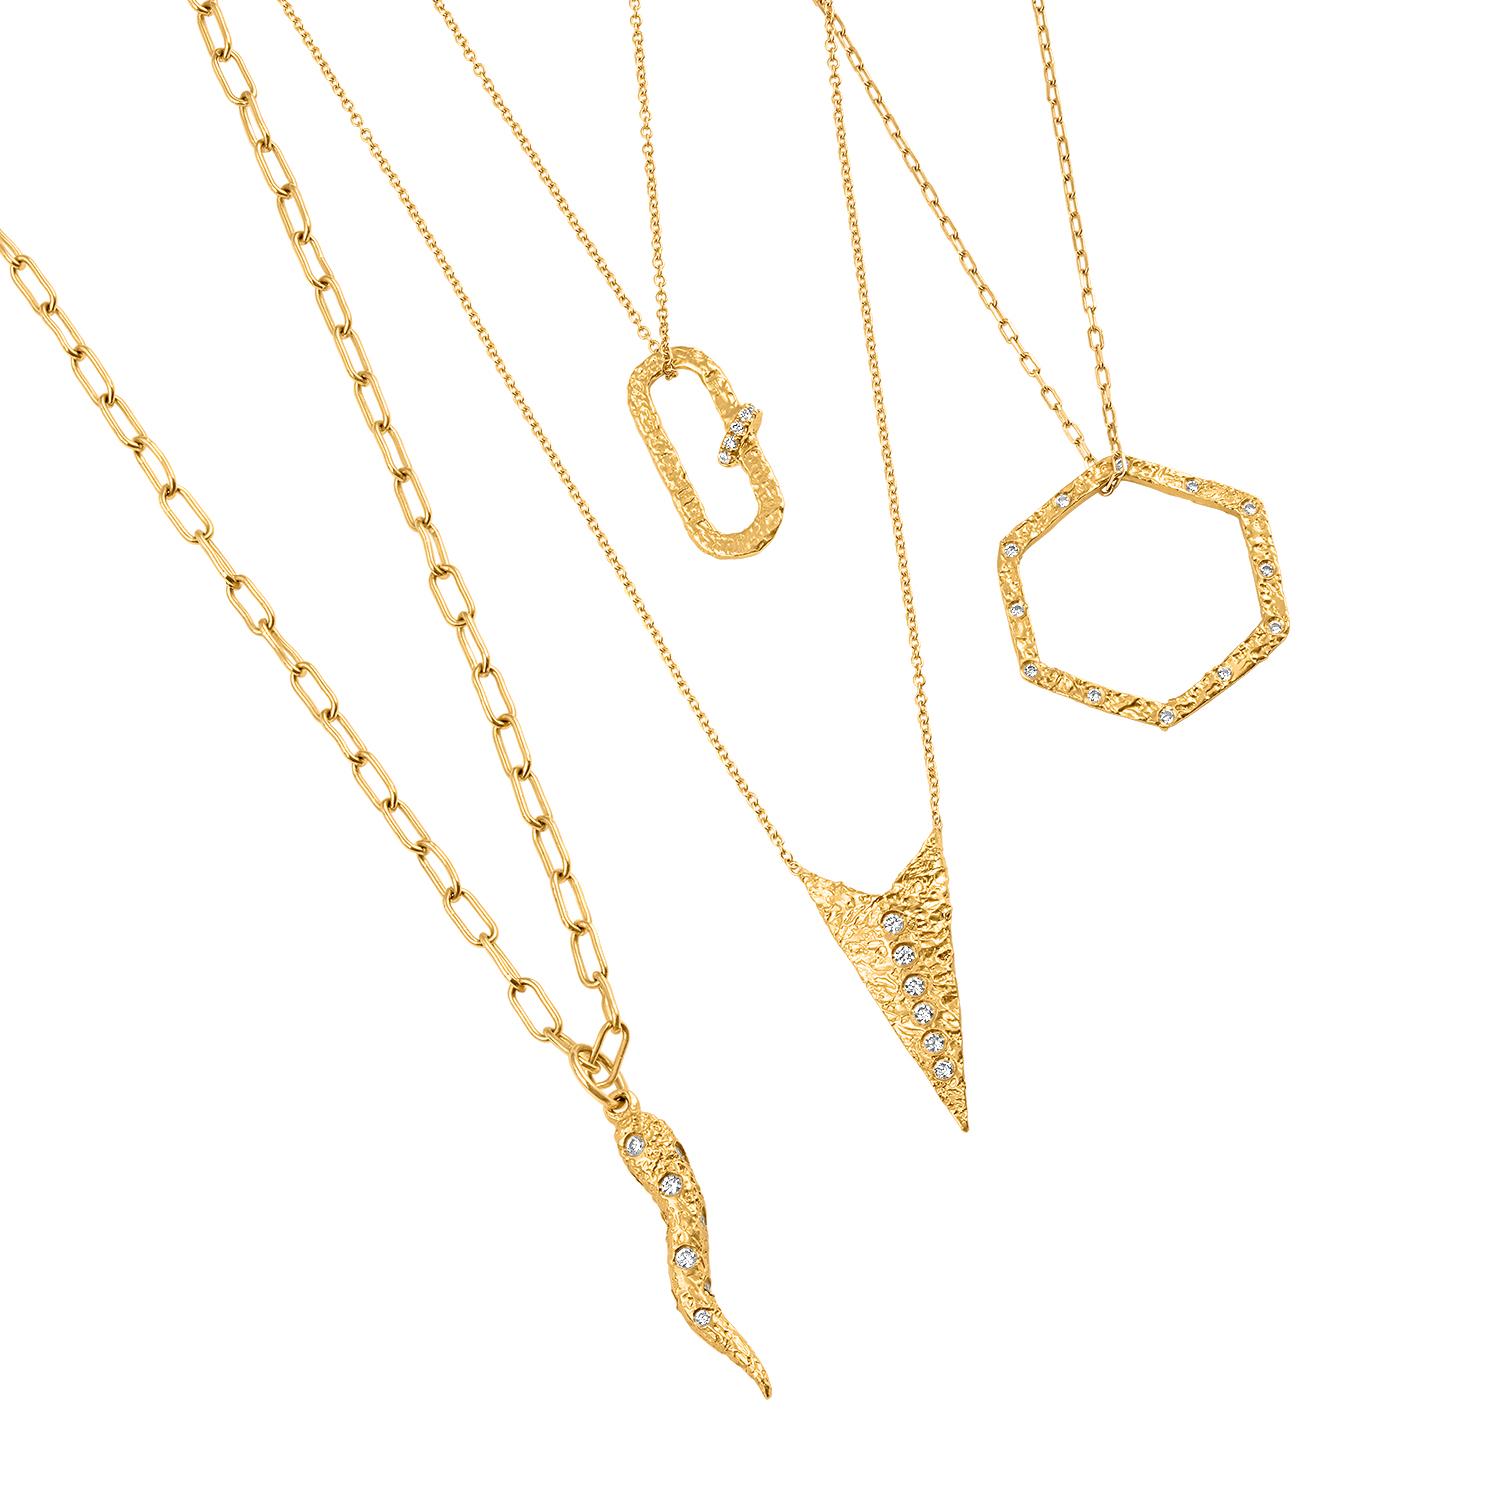 Round Cut The Arrowhead Diamond Necklace in 22k Gold For Sale